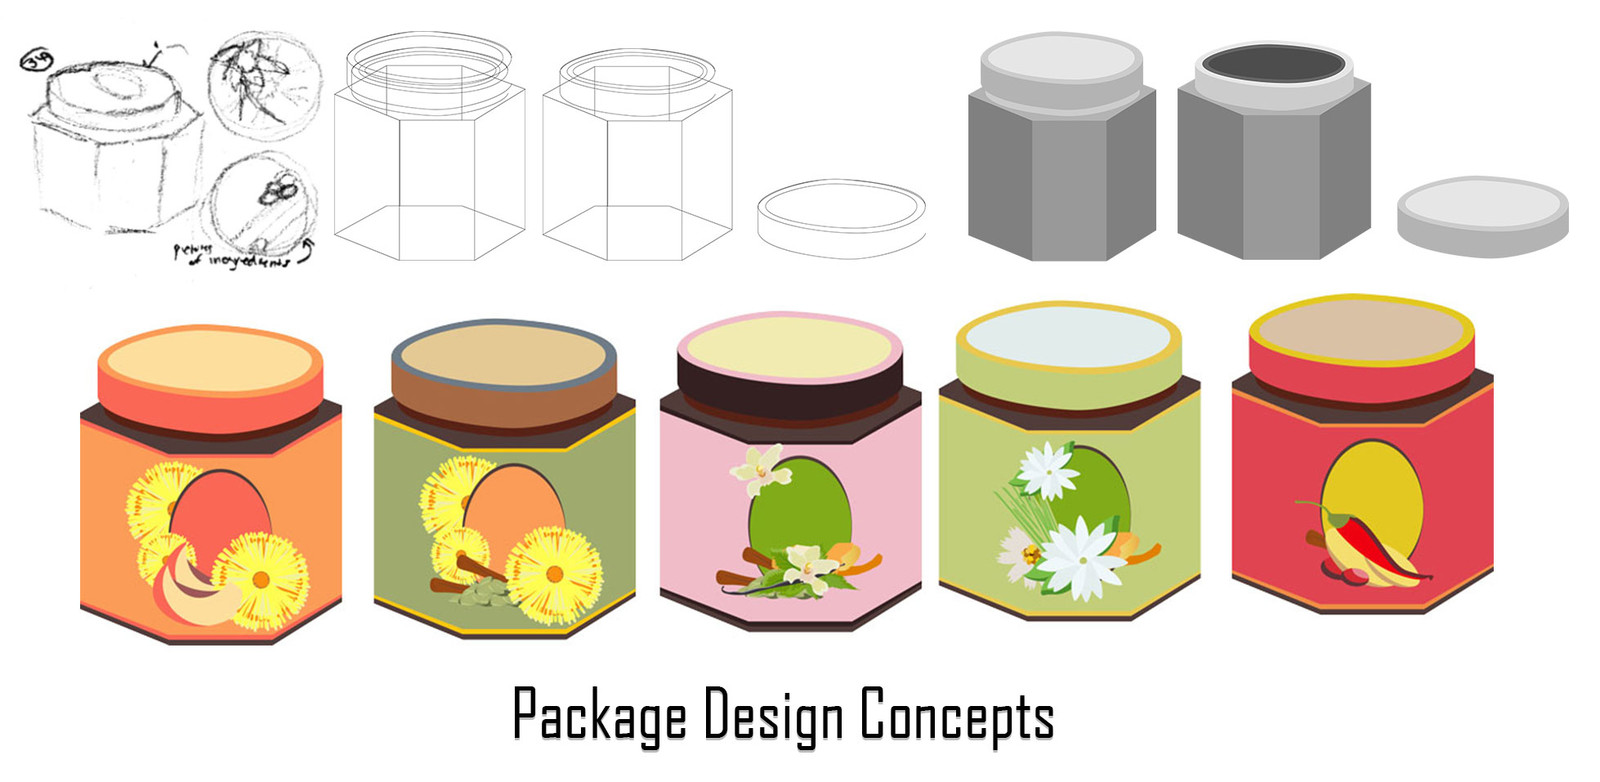 Once a final package design was selected, color testing began.